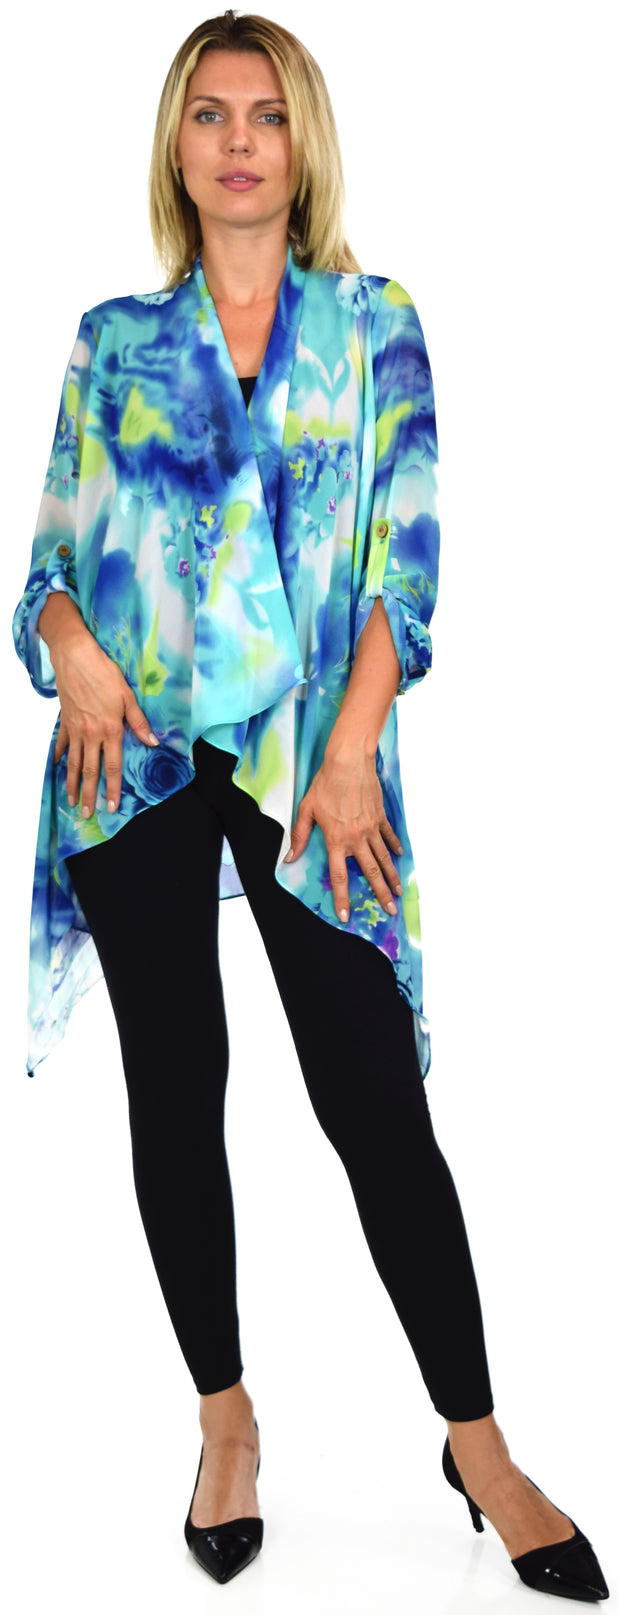 Dare2bstylish Duster, Exclusive Lagenlook Duster, Printed Jacket, Plus size duster, Printed cover up, M to 3XL, Party Wear, Offce Wear